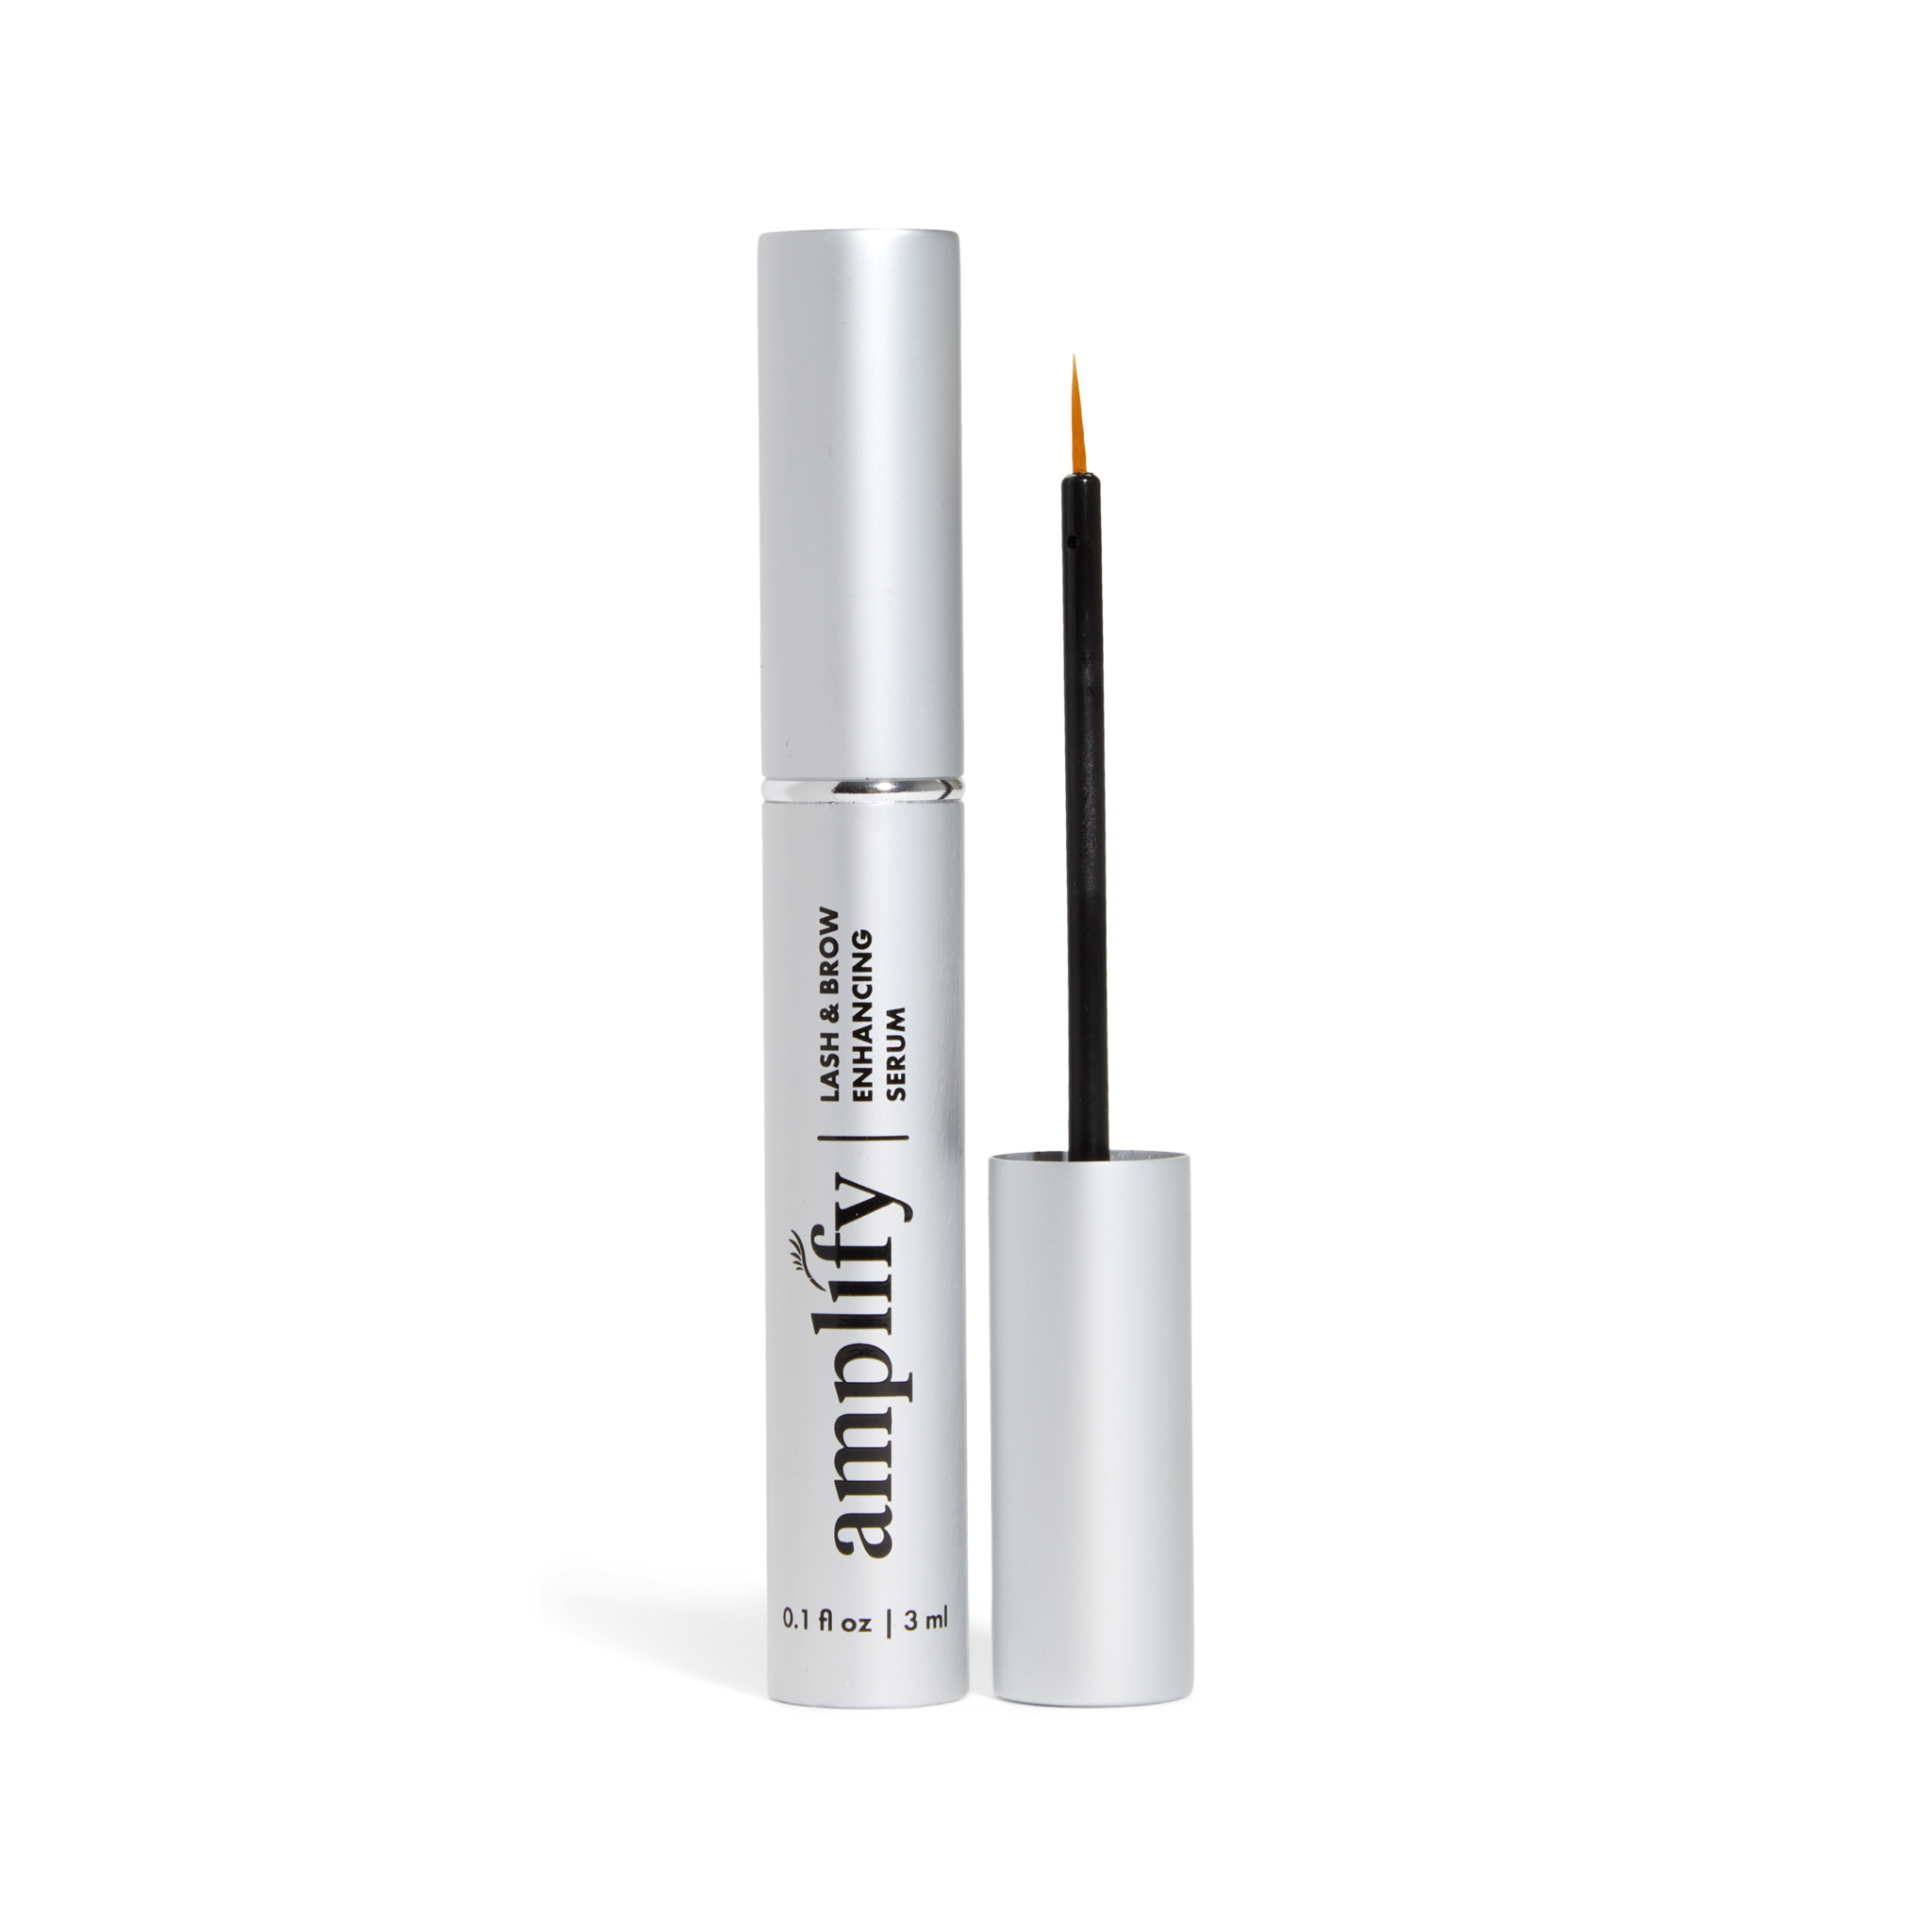 3ml Silver Bottle of Actiiv Amplify Lash and Brow Product with top open showing applicator